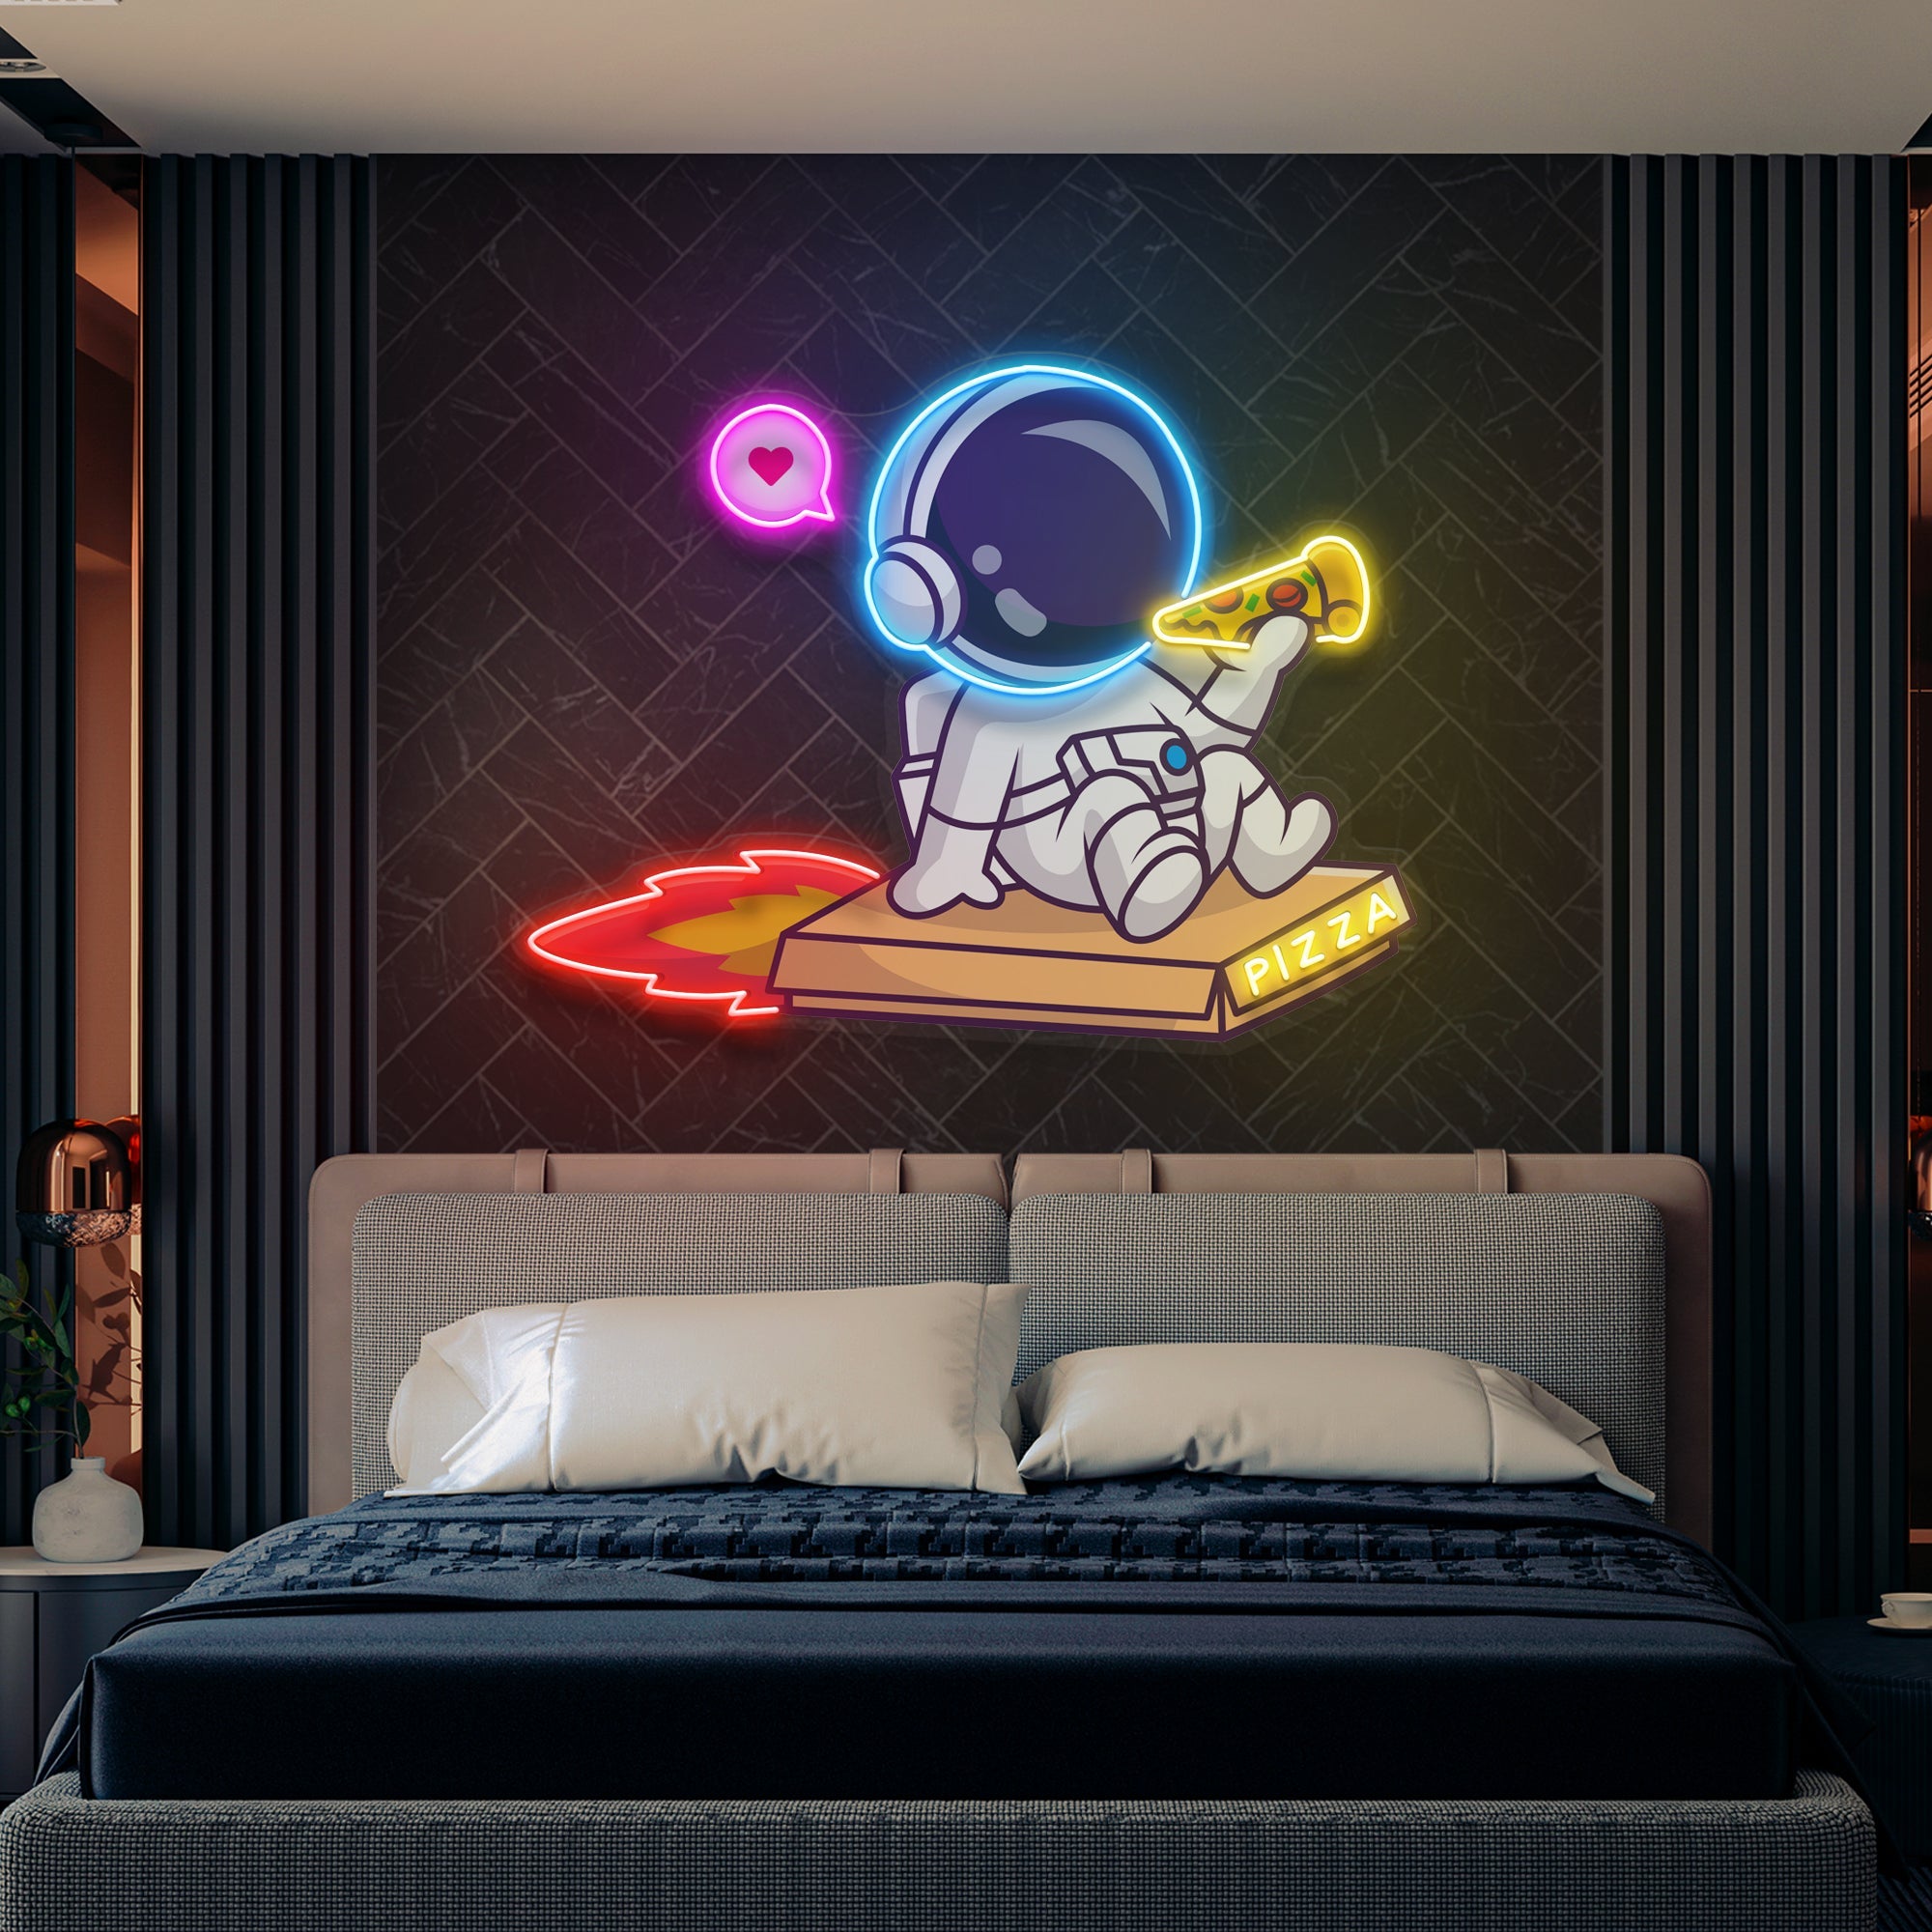 Cute Astronaut Riding Pizza Box Rocket And Eating Pizza Artwork Led Neon Sign Light - Neonbir